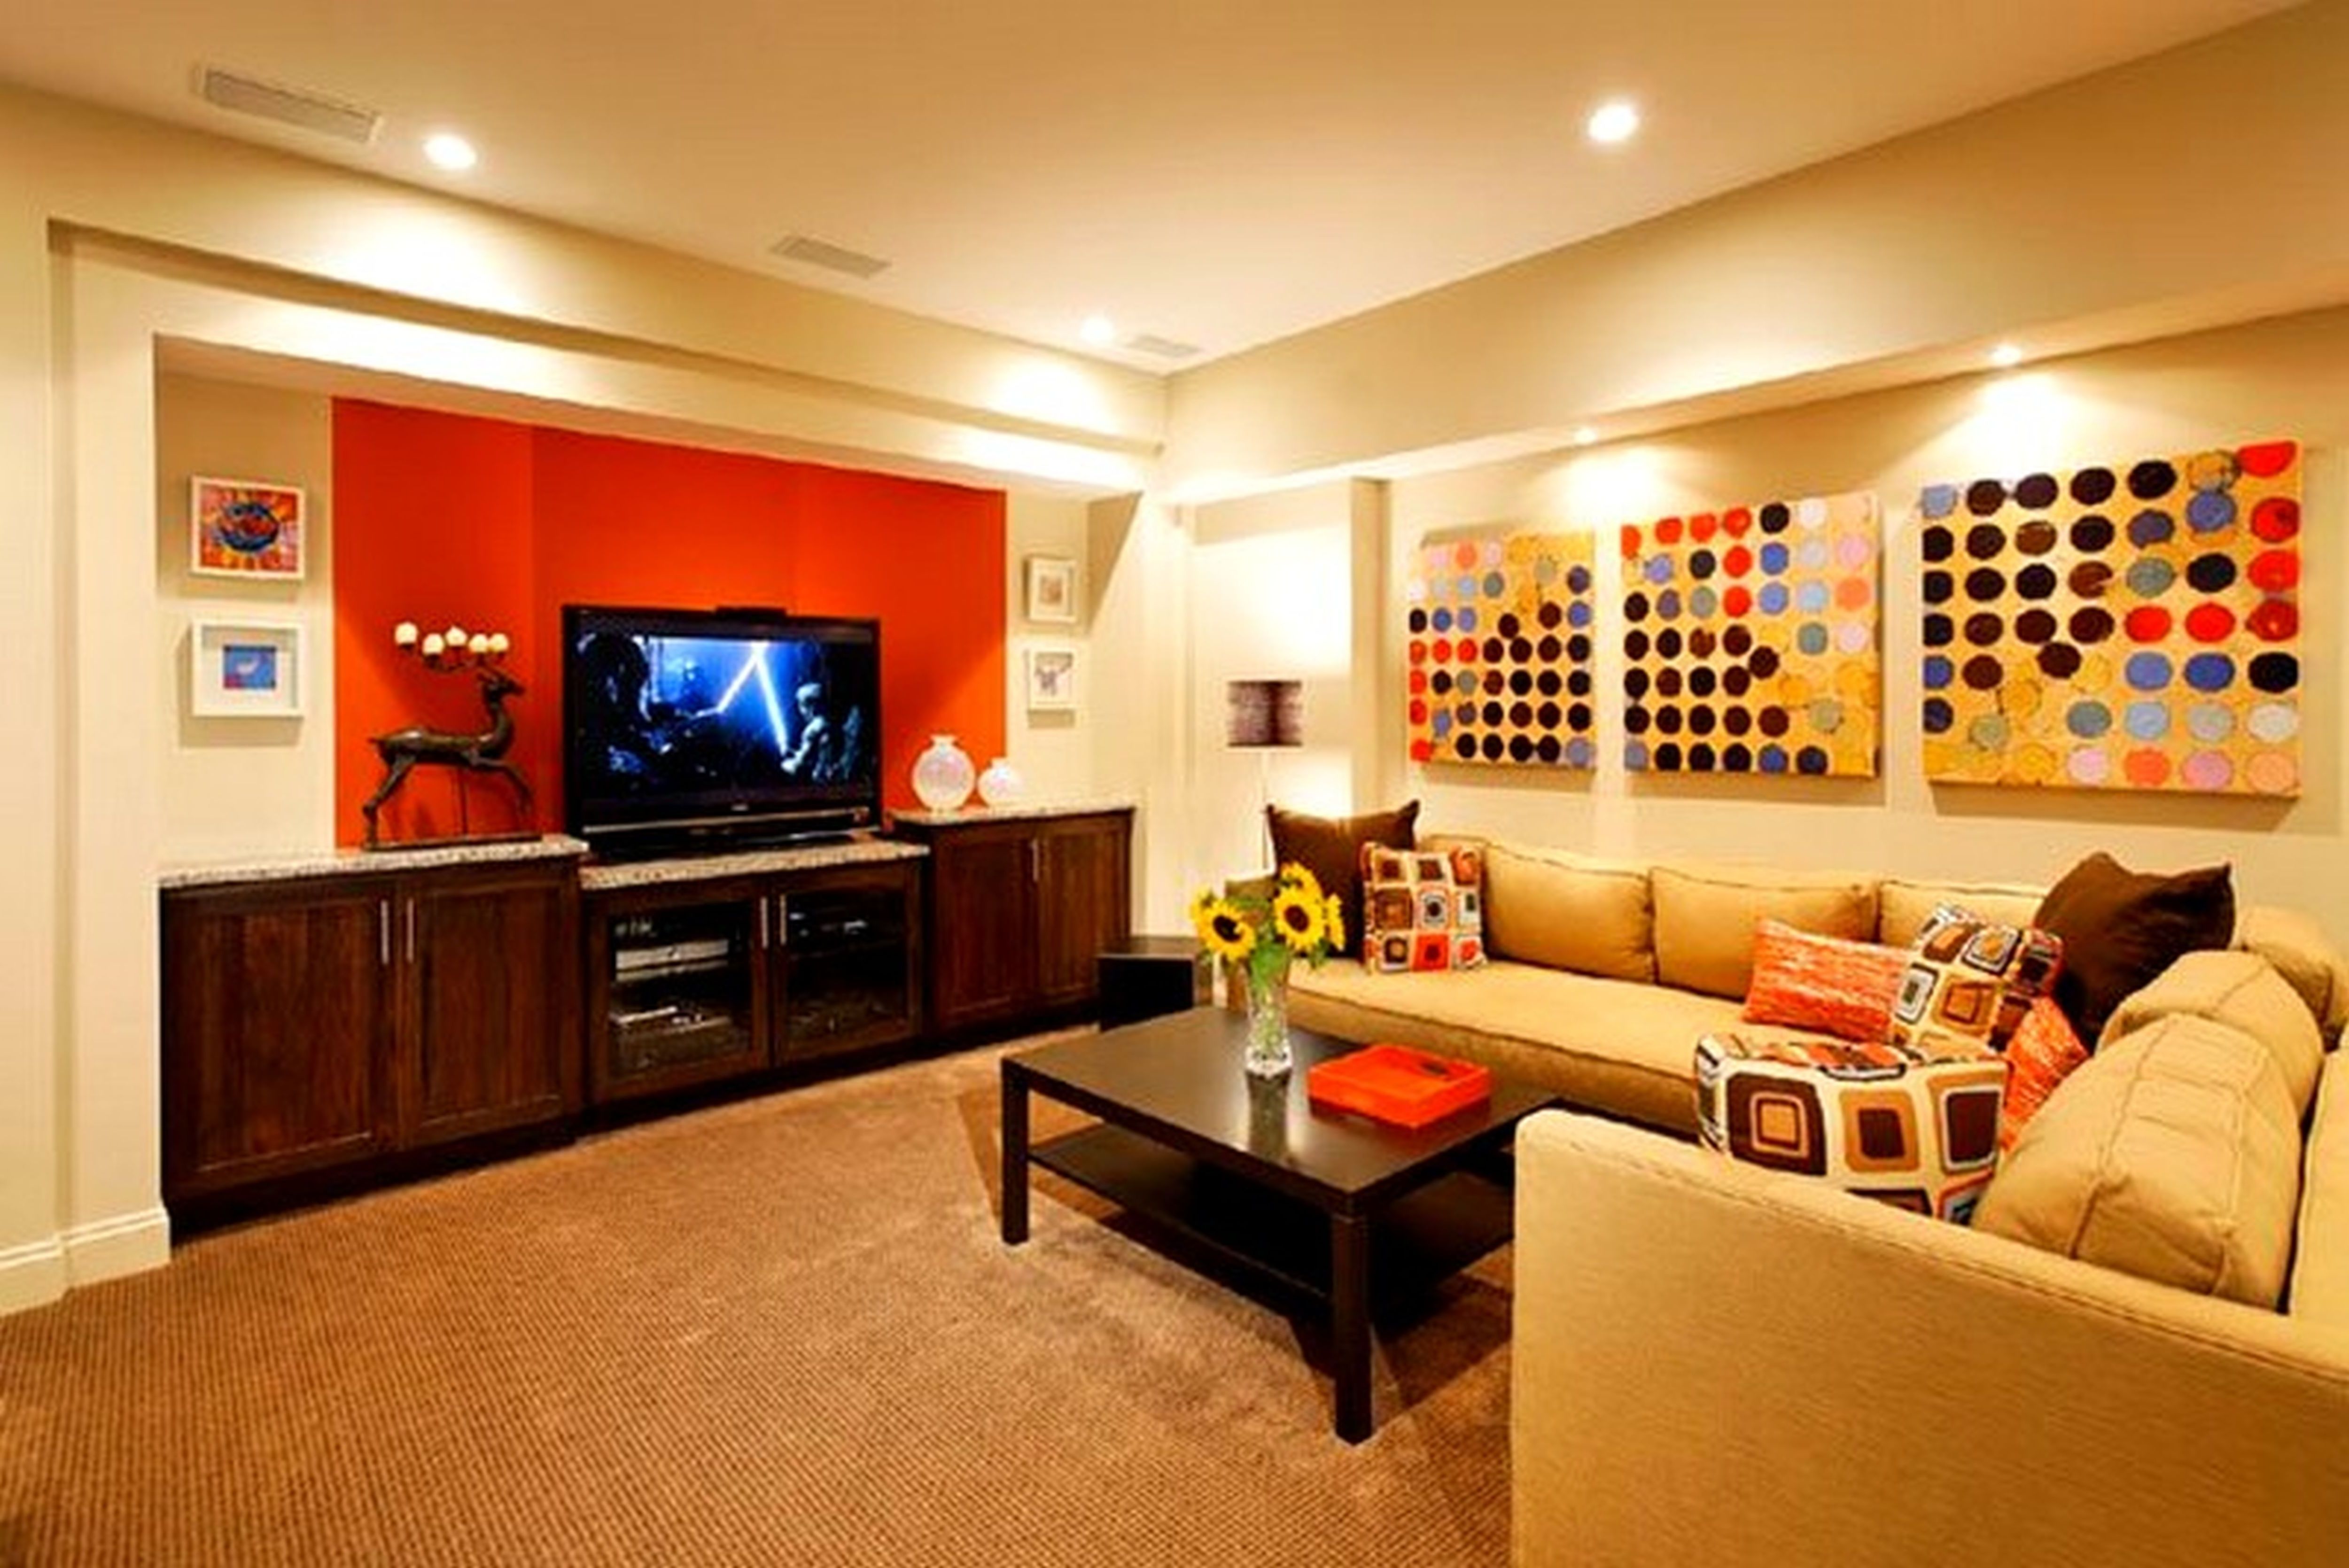 Wall Accents For L Shaped Room In Most Recent Decor Cool Basement Colors Exellent Room Ideas Game For Design (View 9 of 15)